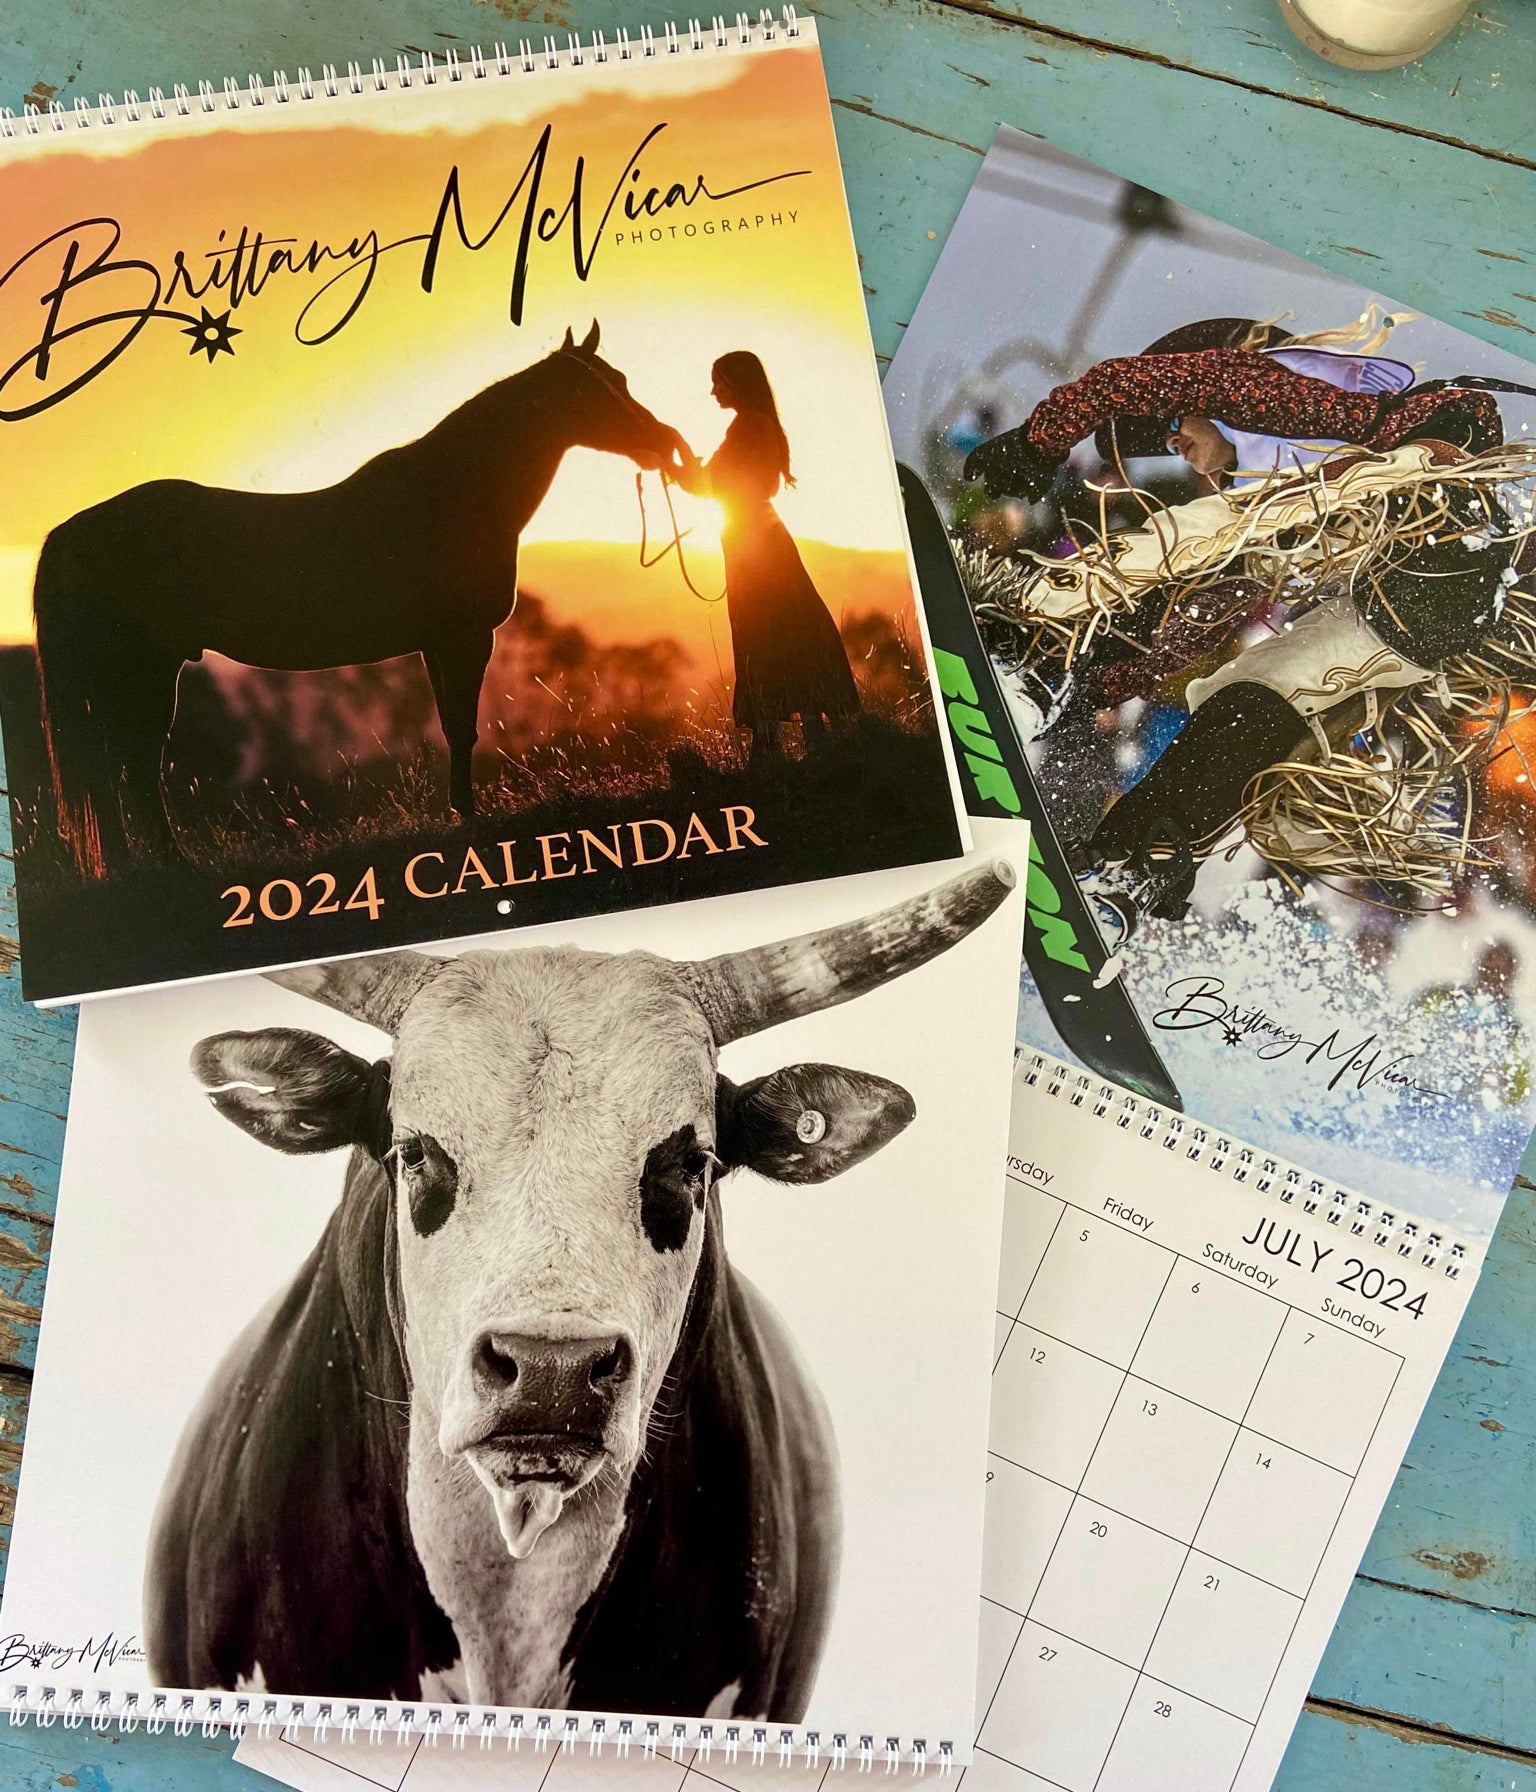 Brittany McVicar Photography COUNTRY Calendar 2024